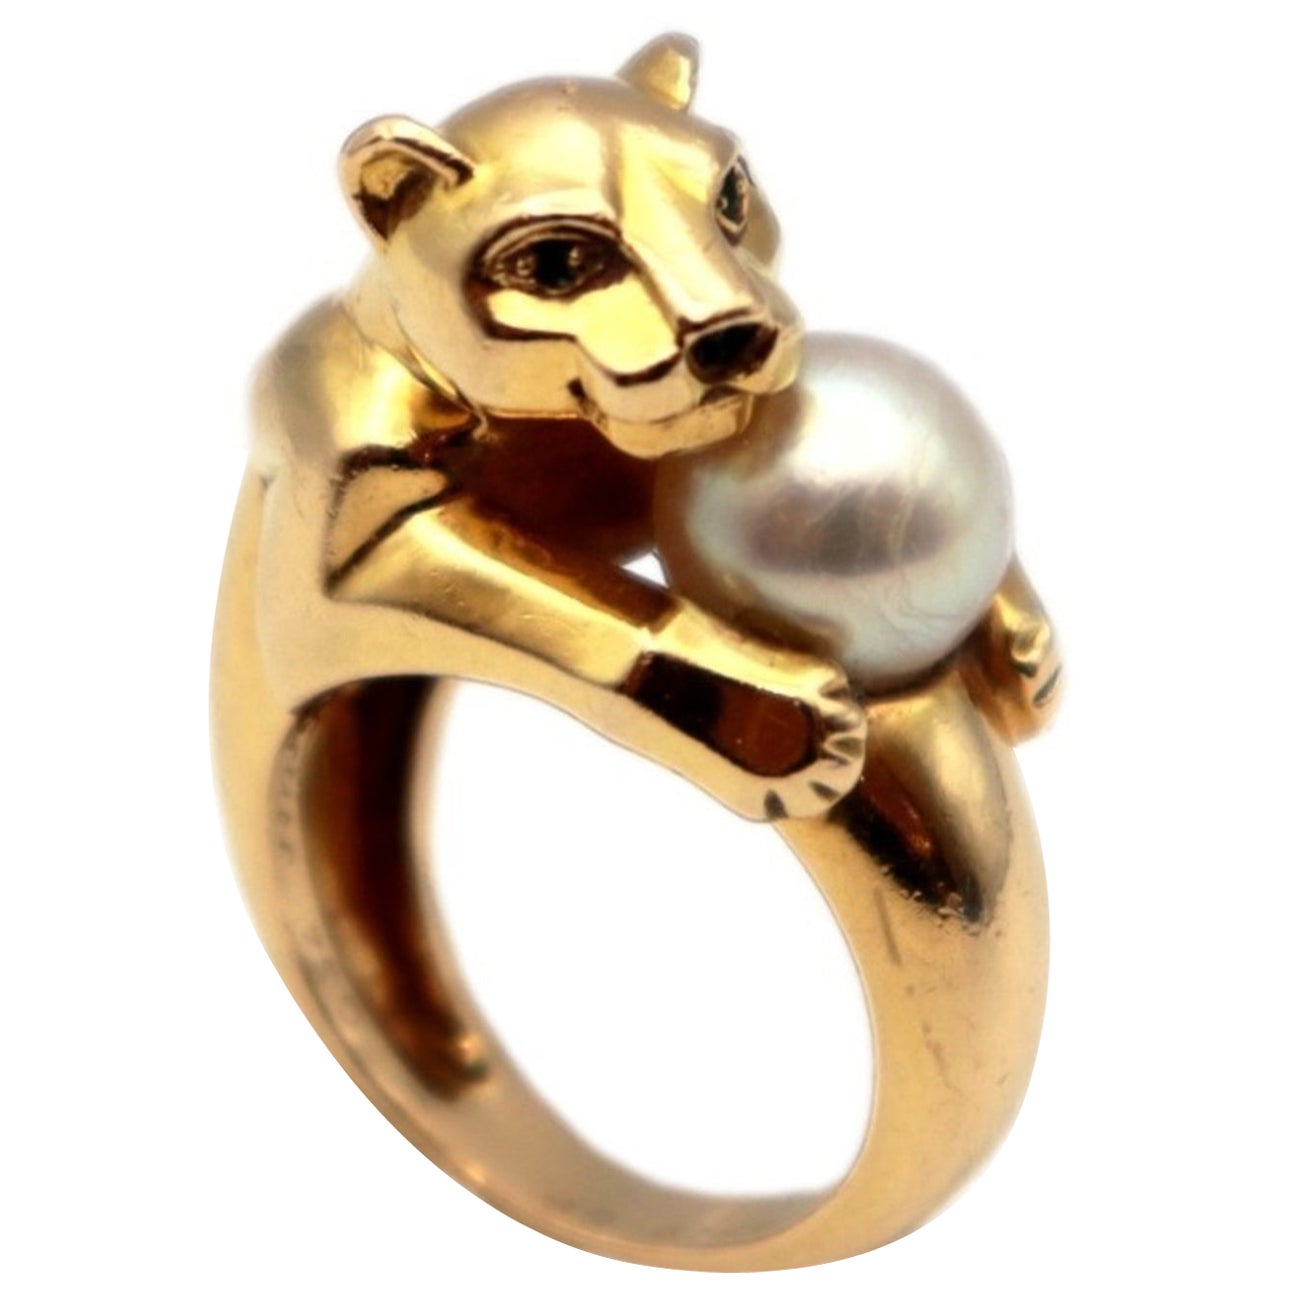 Cartier Vedra Panther Pearl, Emerald, Onyx Ring in 18K Yellow Gold